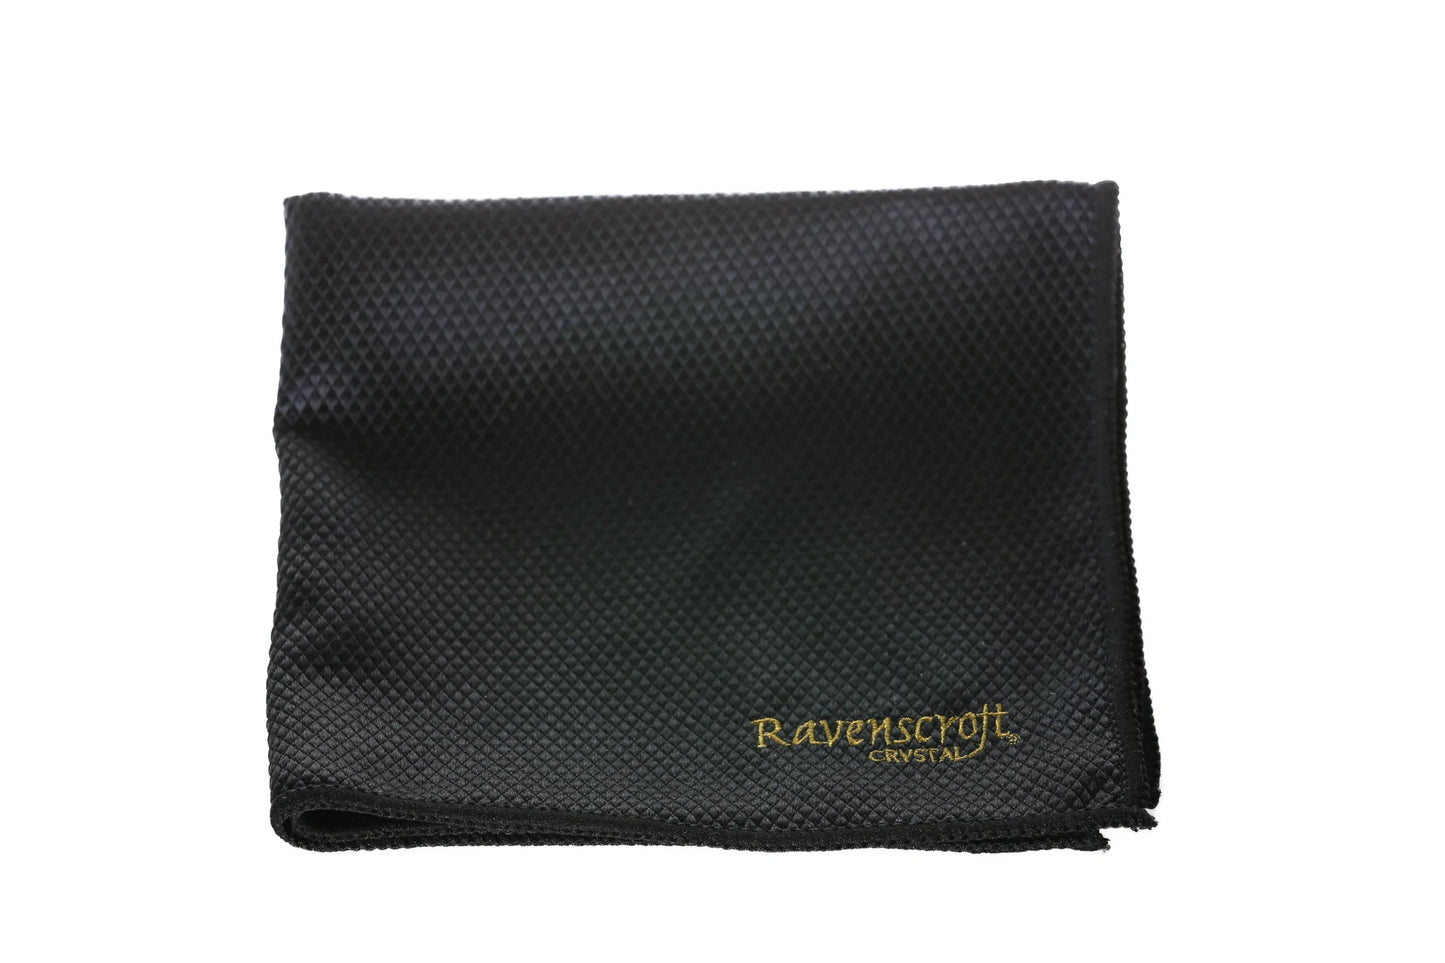 Ravenscroft Invisibles New World Cabernet/Syrah Glass (Set of 4) with Free Microfiber Cleaning Cloth IN-55